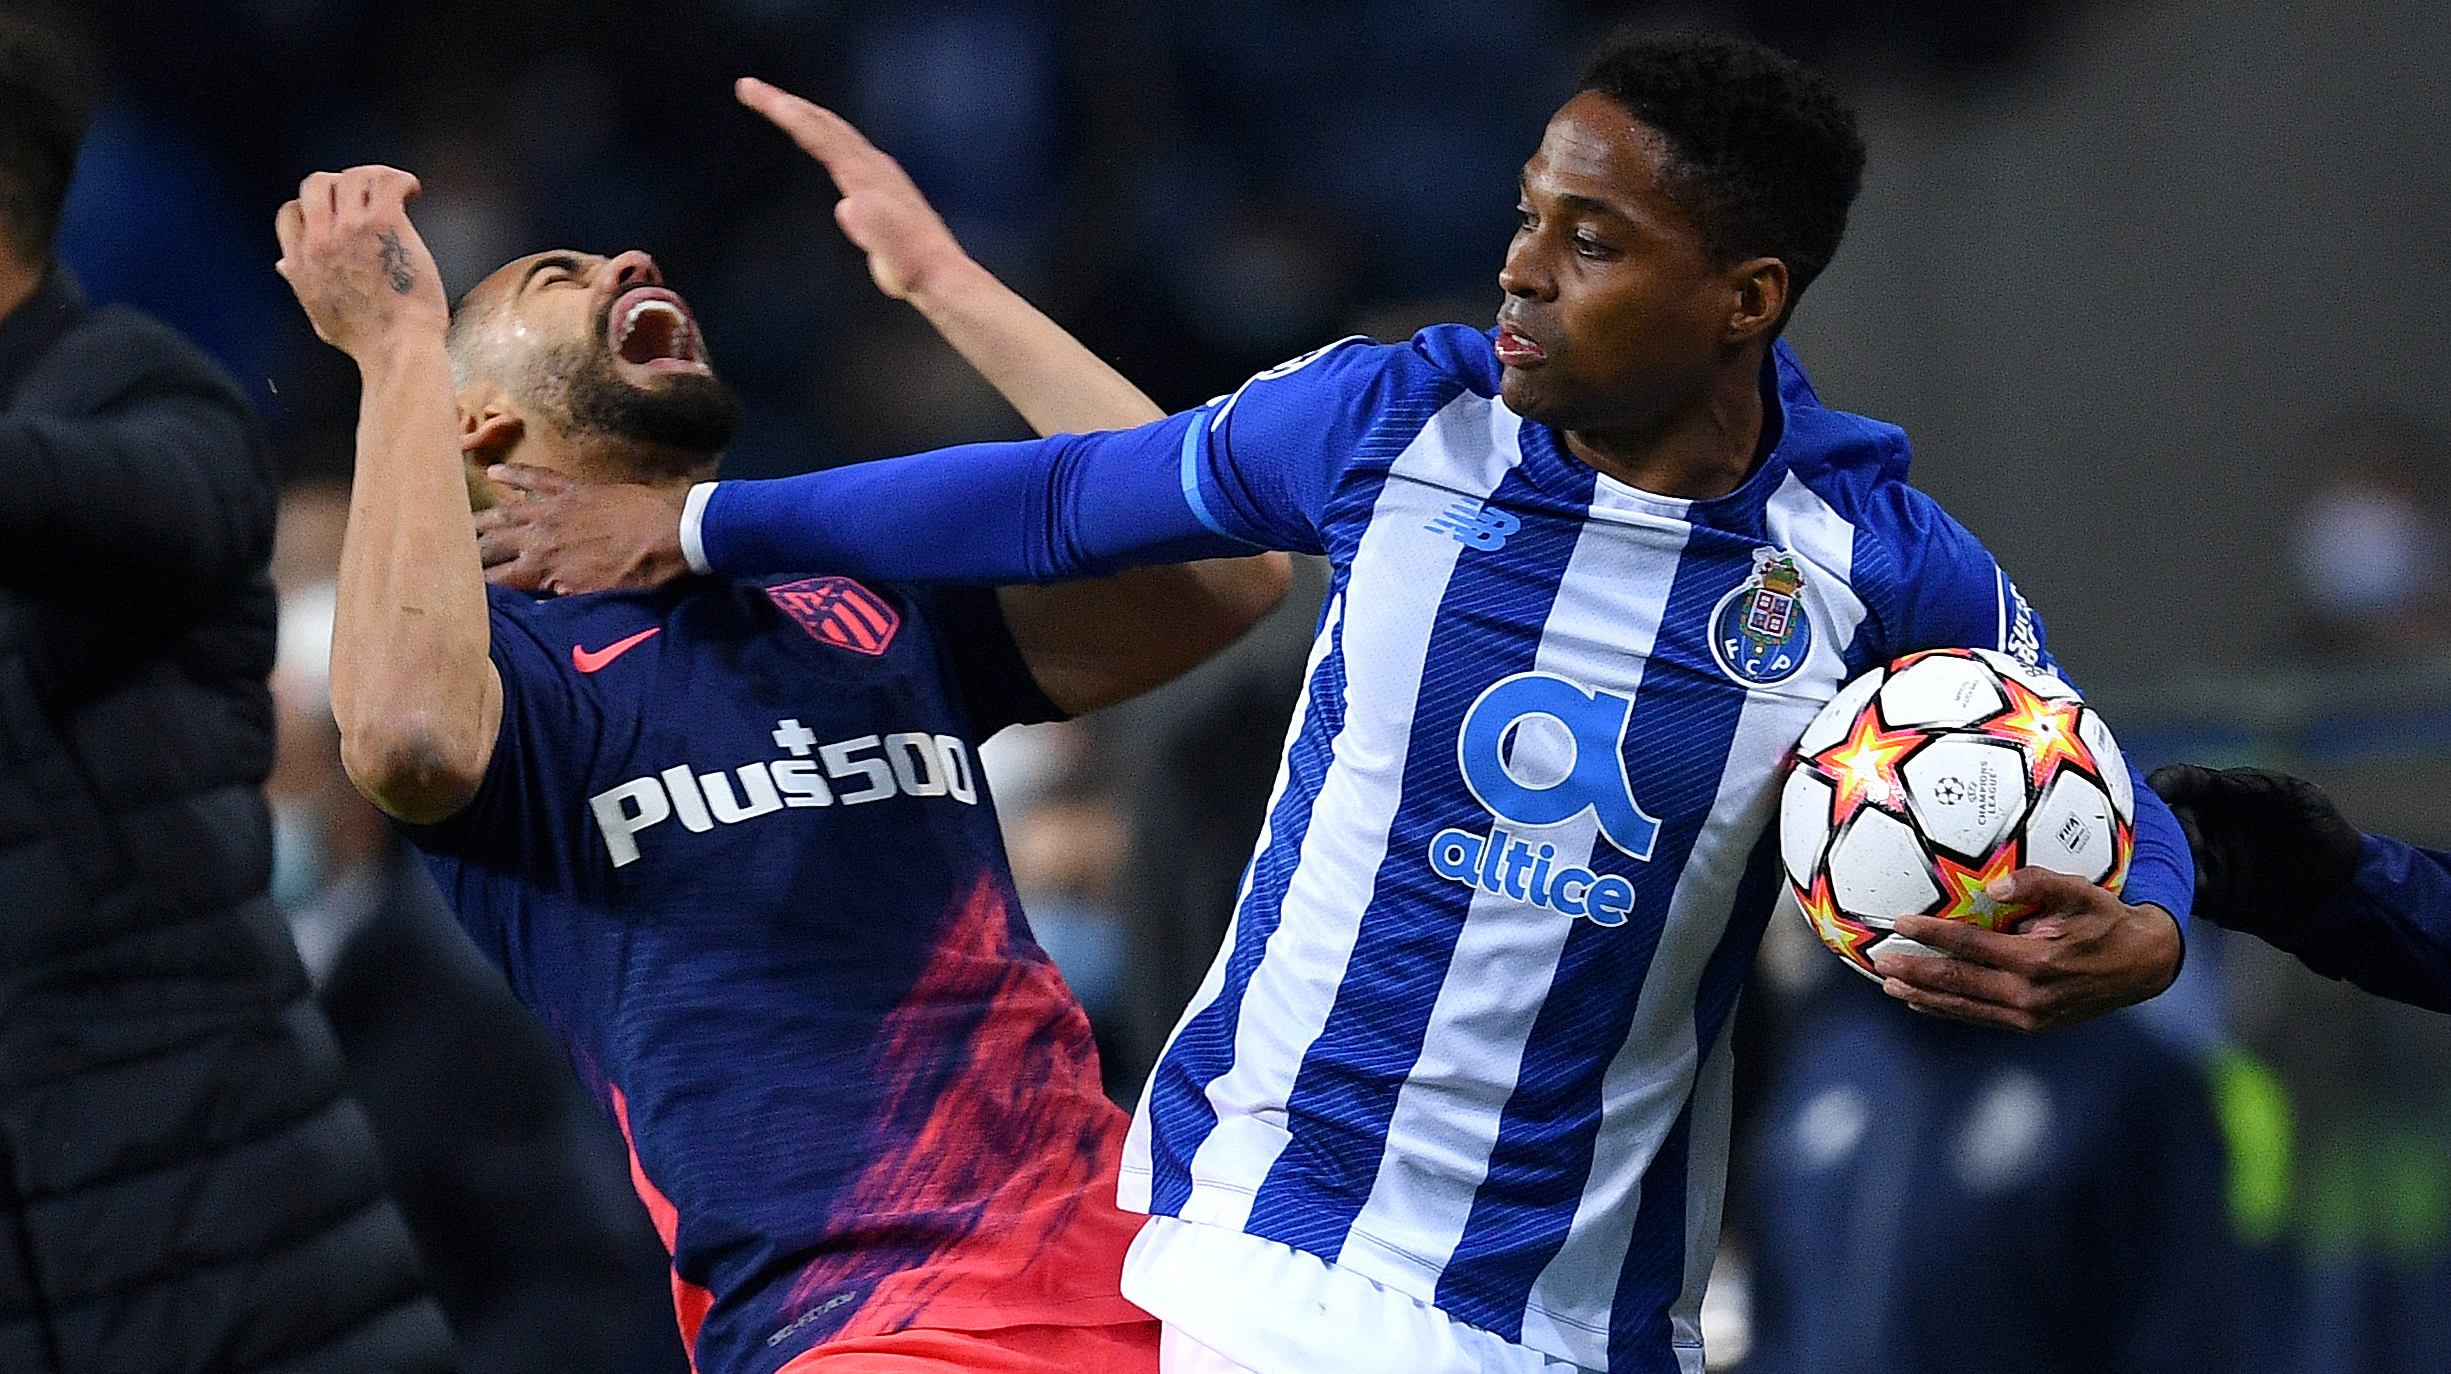 Wendell of FC Porto clashes with Matheus Cunha of Atletico Madrid during the UEFA Champions League group B match between FC Porto and Atletico Madrid at Estadio do Dragao on December 07, 2021 in Porto, Portugal.